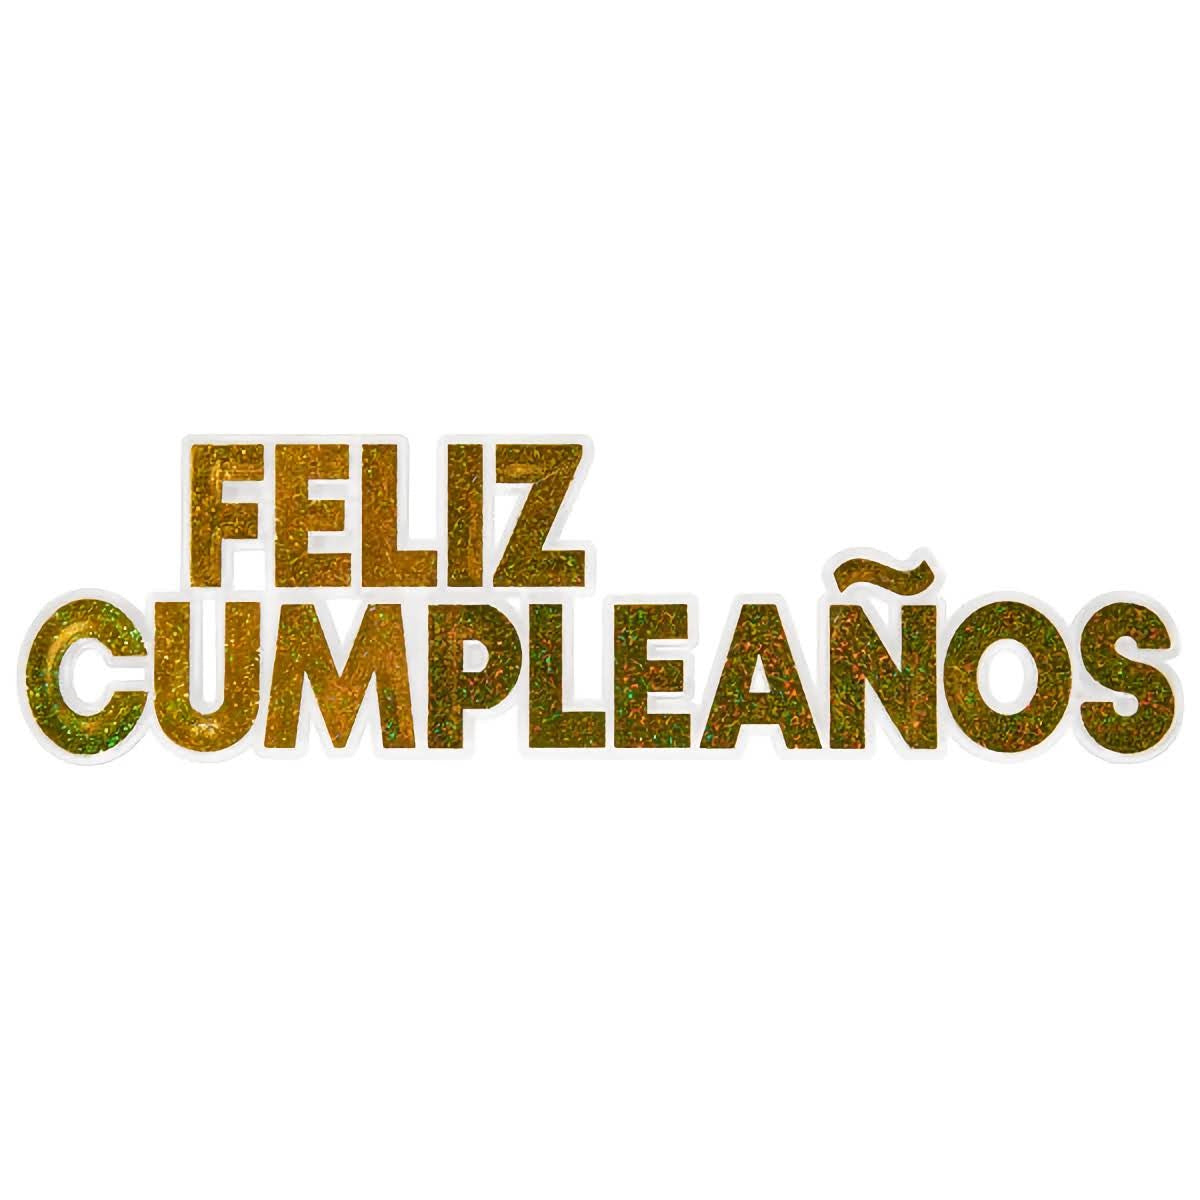 "Glittery gold 'Feliz Cumpleaños' cake topper with a sparkling finish, adding a festive and luxurious touch to any birthday cake, perfect for Spanish-speaking celebrations."